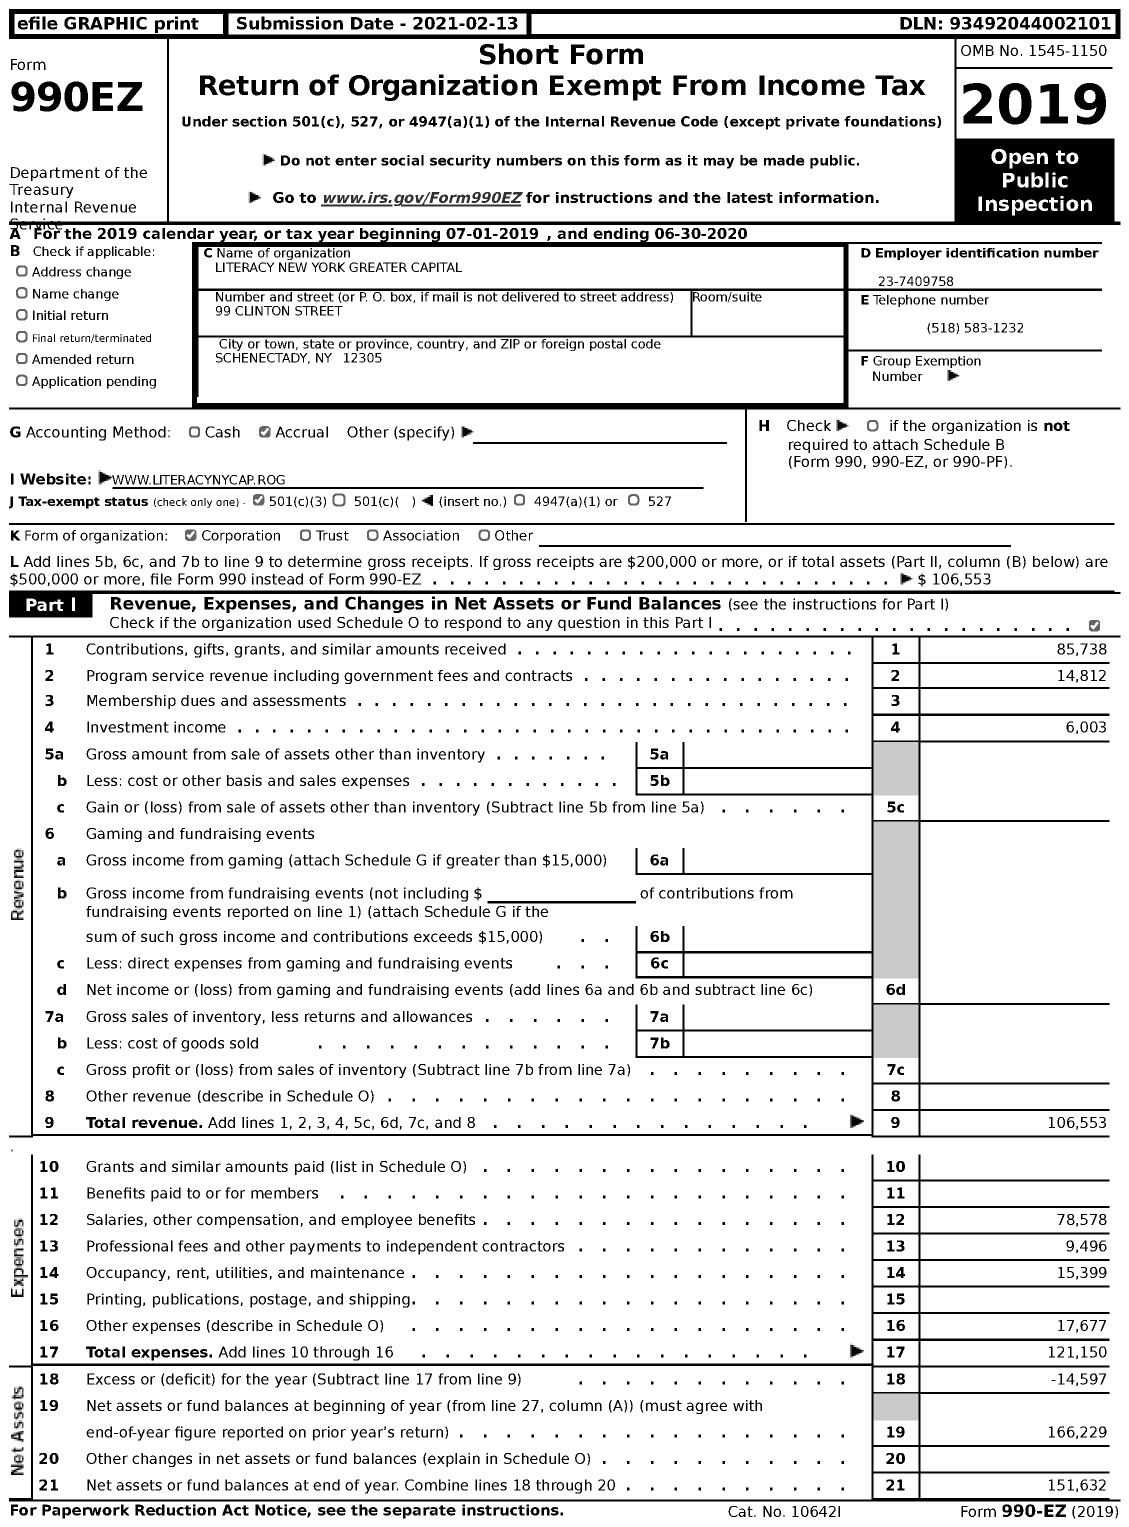 Image of first page of 2019 Form 990EZ for Literacy New York Greater Capital